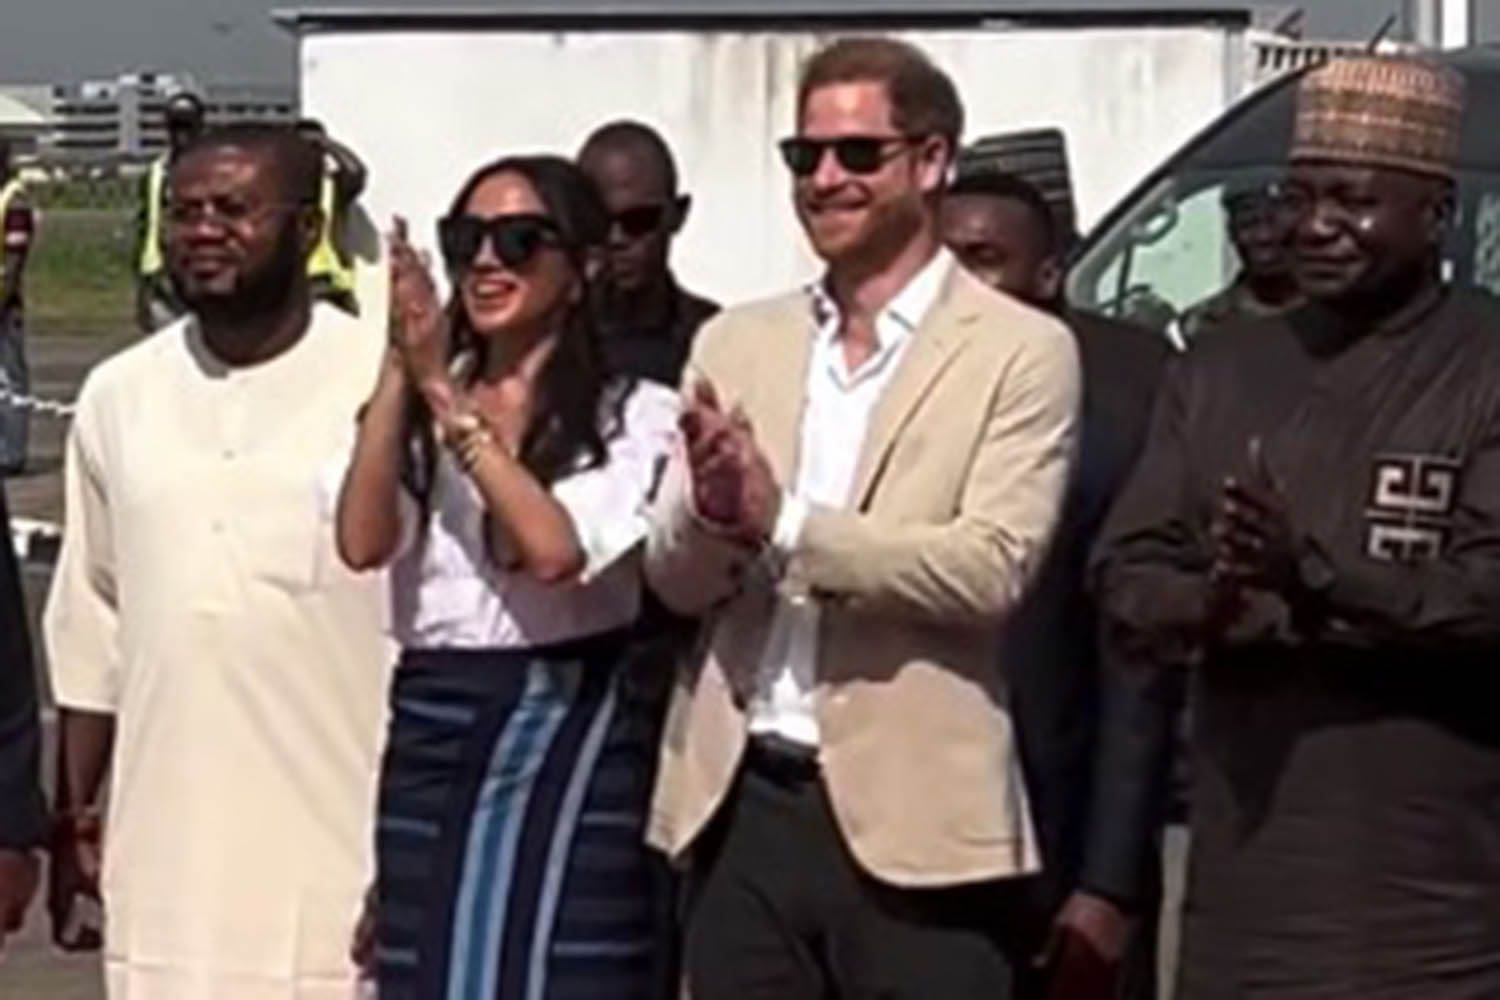 Meghan Markle Wears Traditional Skirt Gifted to Her in Nigeria After Admitting She Needs to 'Wear More Color'